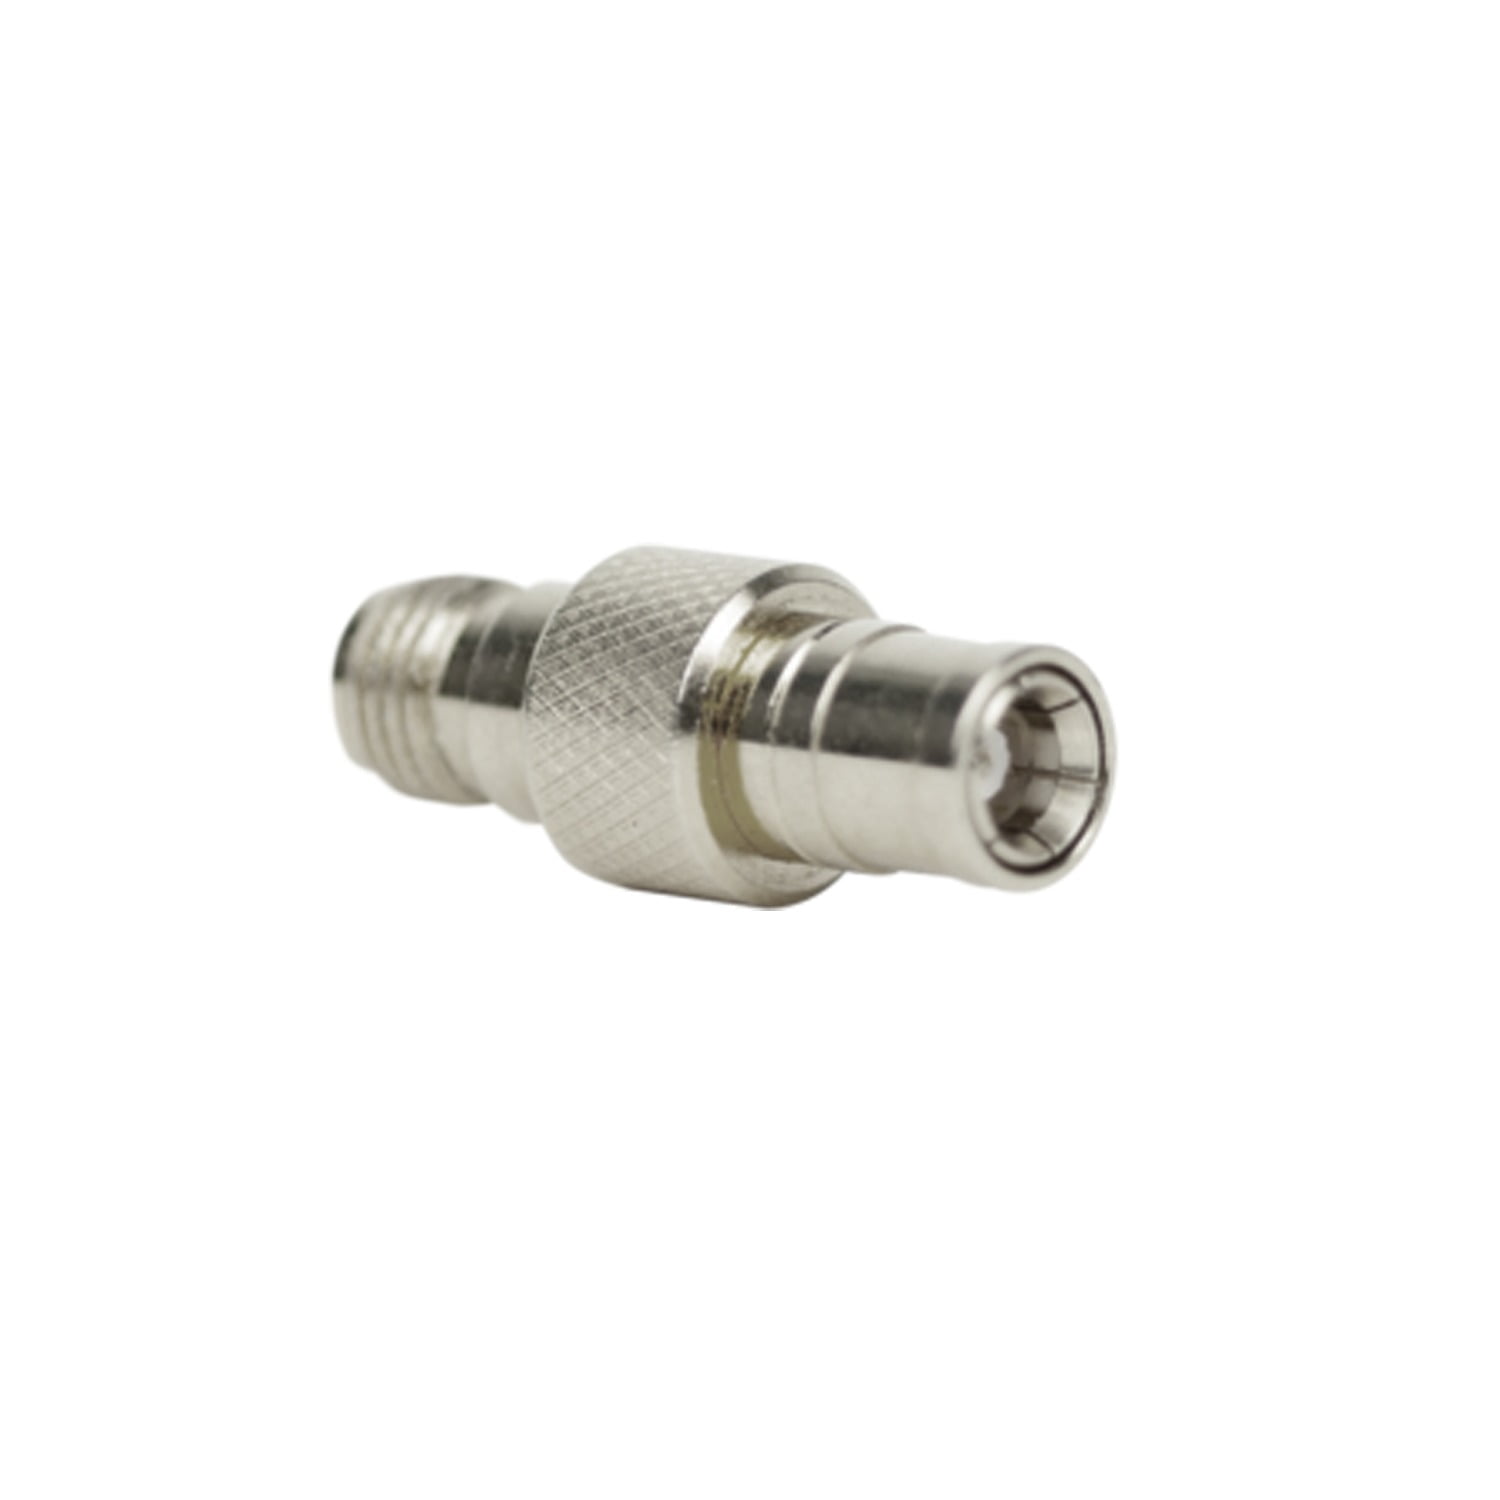 10pcs SMB Male Plug to SMA Female Jack RF Coaxial Adapter Connector for sale online 